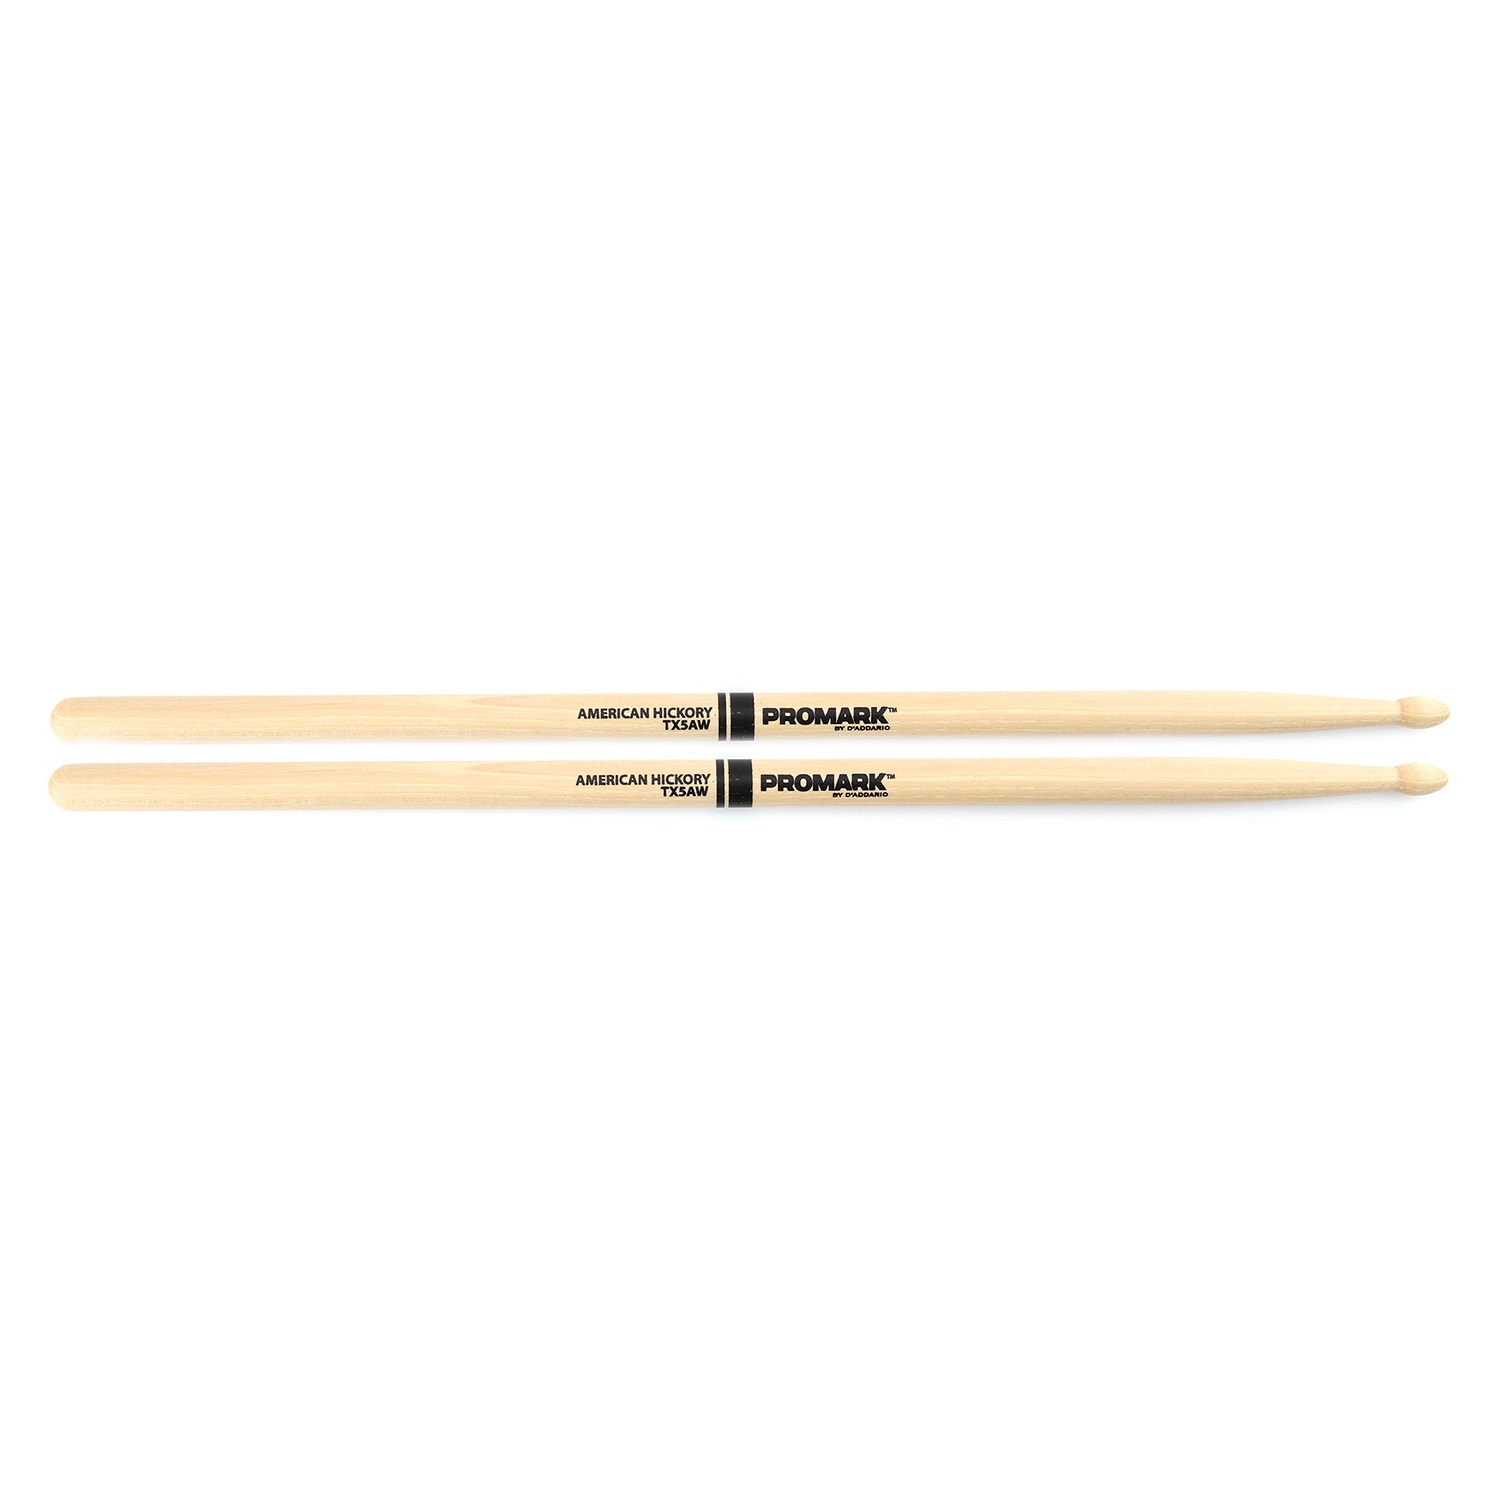 An image of Promark Hickory 5A Wood Tip Drumstick Pair - Gift for a Drummer | PMT Online